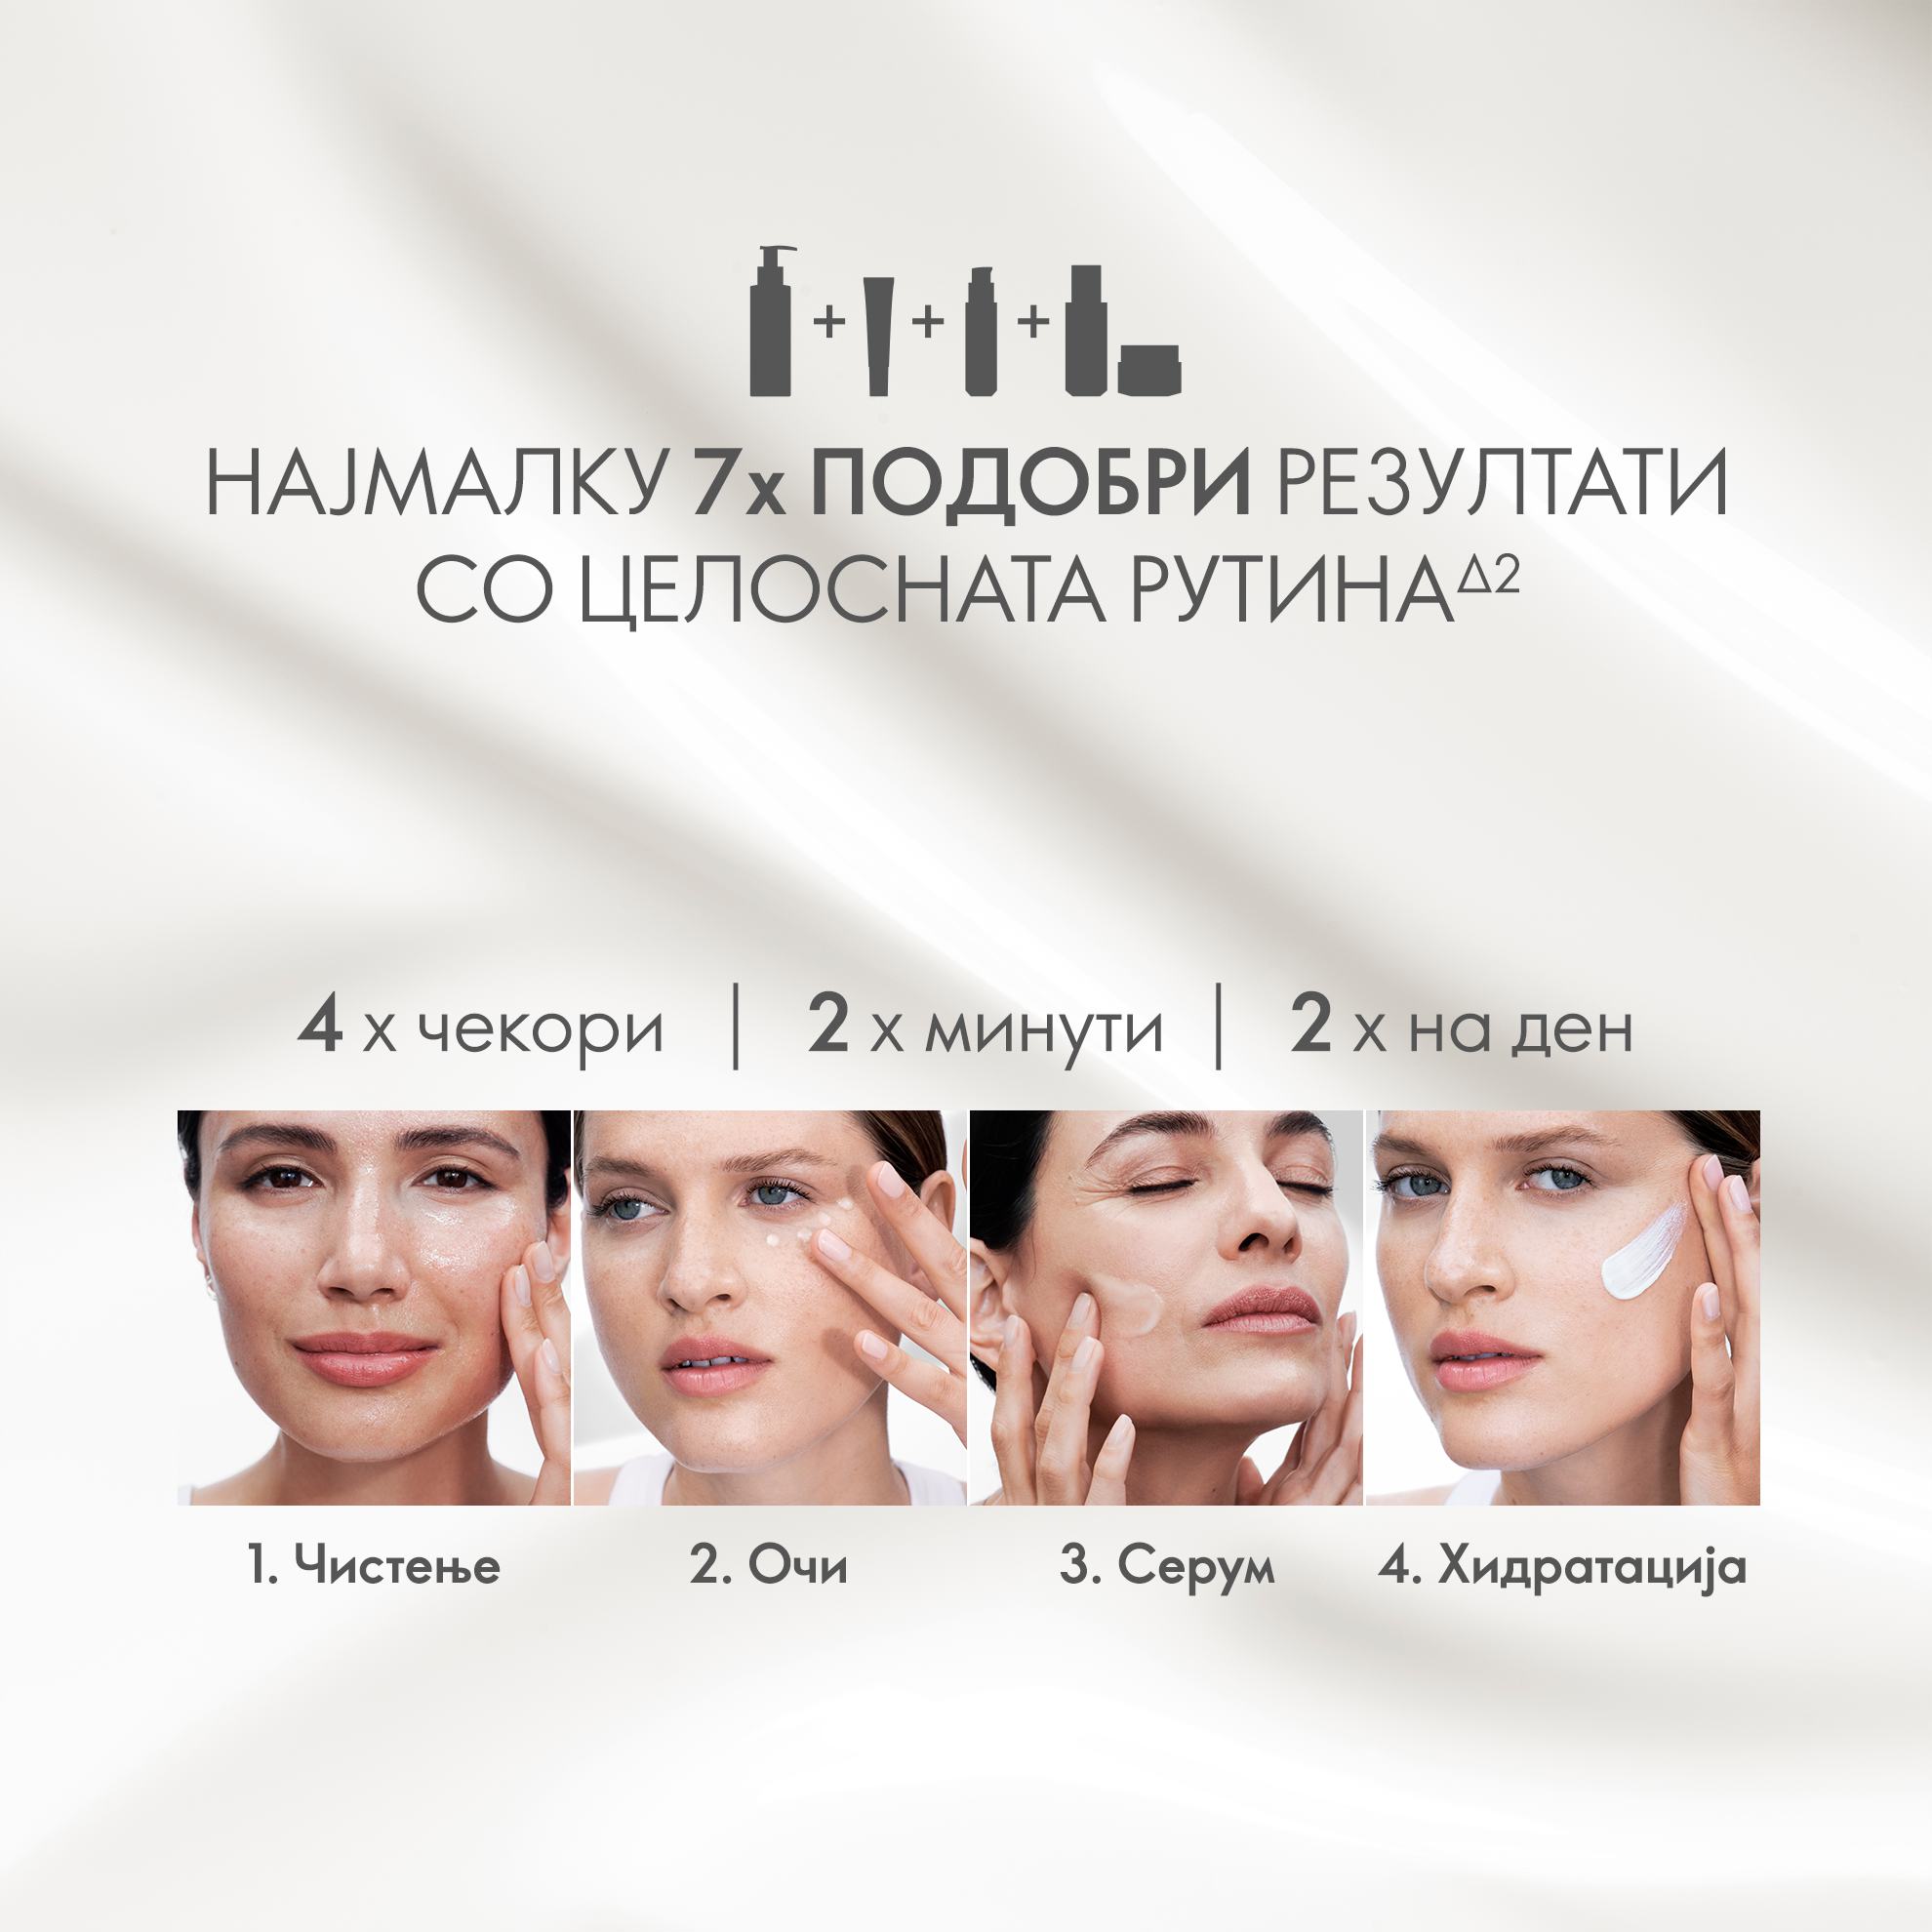 https://media-cdn.oriflame.com/productImage?externalMediaId=product-management-media%2fProducts%2f45590%2fMK%2f45590_5.png&id=17551460&version=2